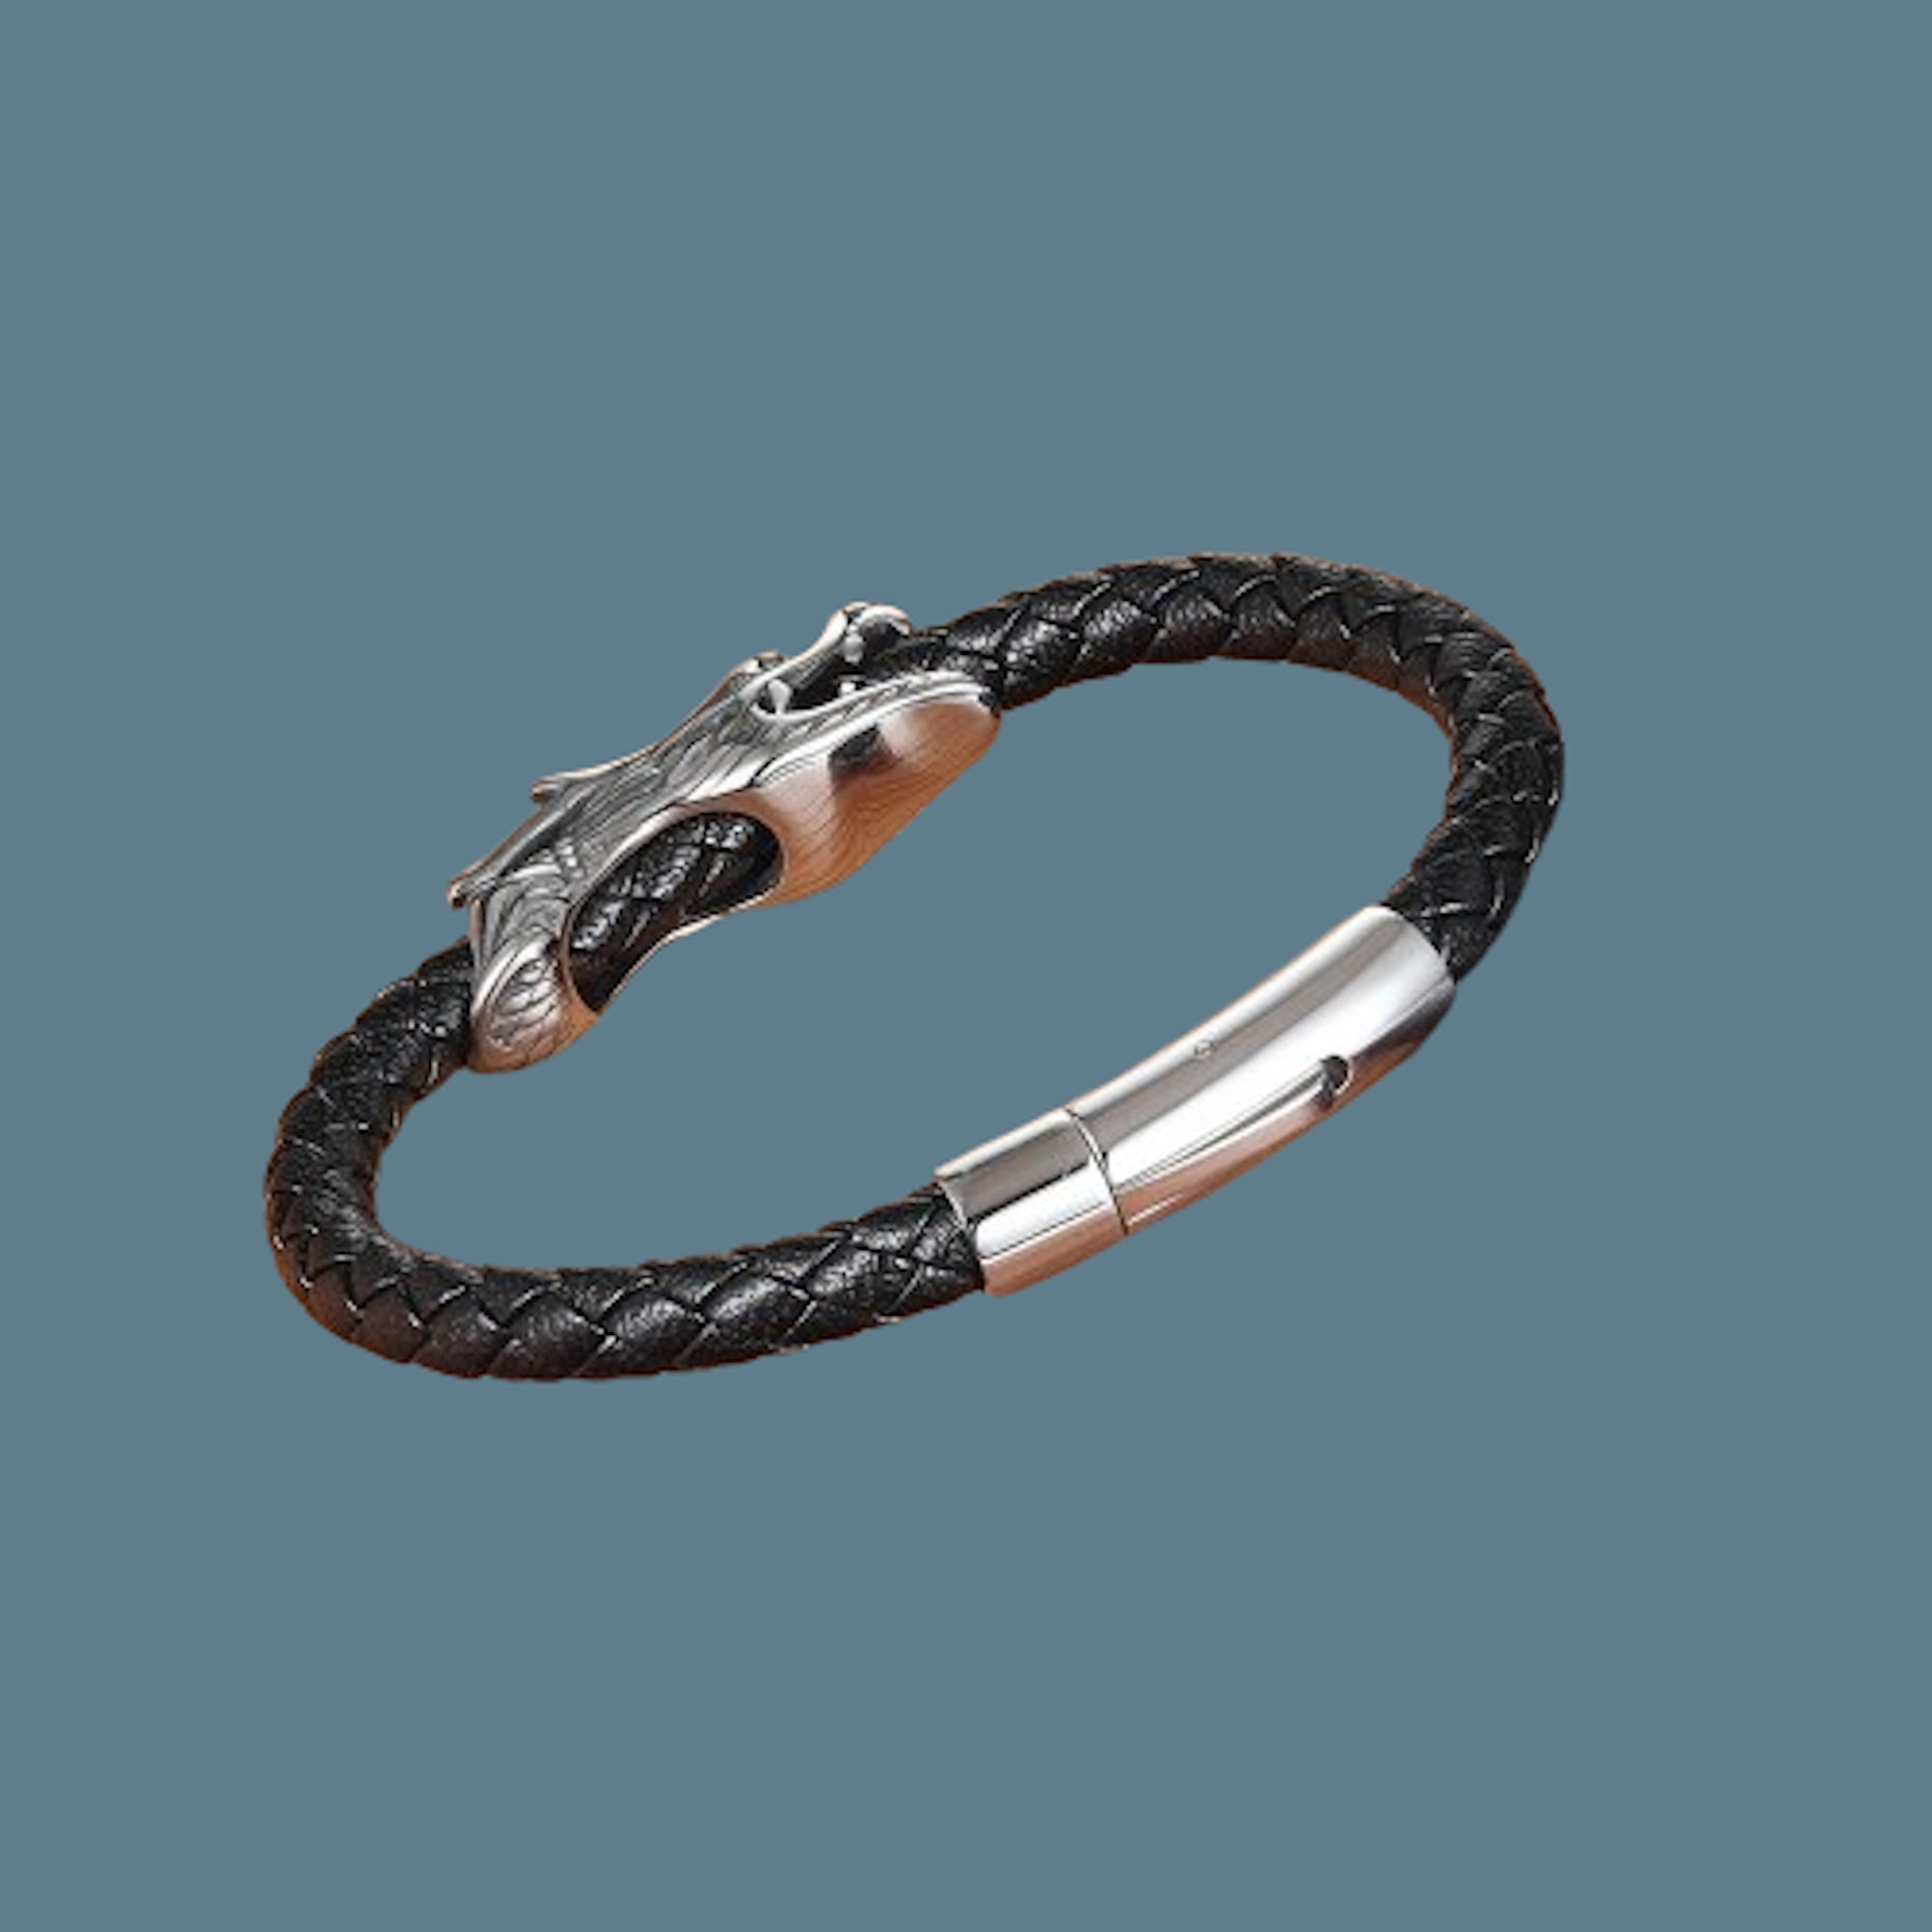 Dragon Clasp Stainless Steel Leather Bracelet, Brown / A / 18.5 cm